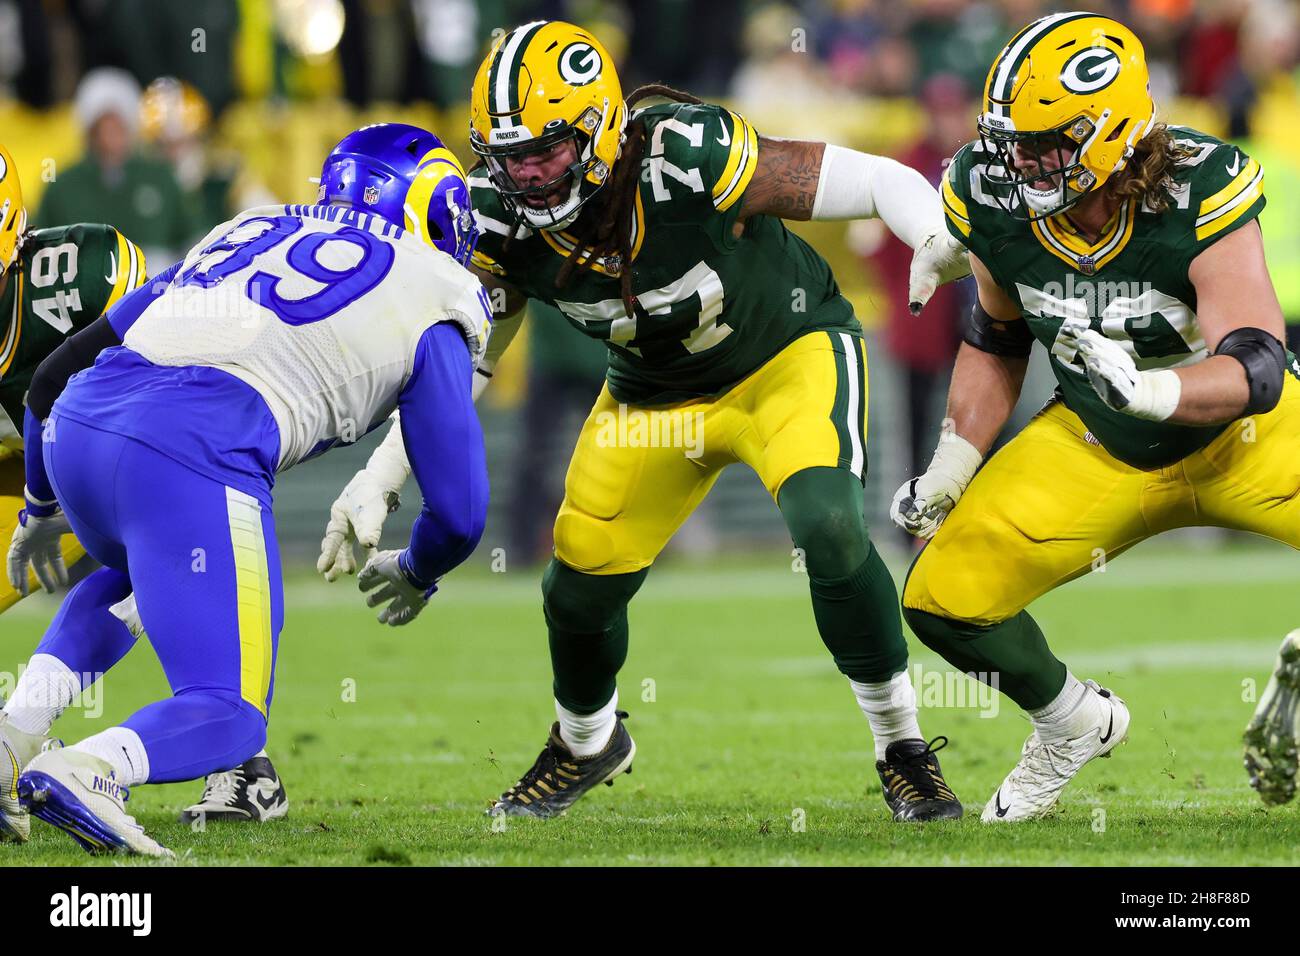 Green Bay, Wisconsin, USA. 28th Nov, 2021. Green Bay Packers offensive tackle Billy Turner (77) and guard Royce Newman (70) take on Los Angeles Rams defensive end Aaron Donald (99) during the NFL football game between the Los Angeles Rams and the Green Bay Packers at Lambeau Field in Green Bay, Wisconsin. Darren Lee/CSM/Alamy Live News Stock Photo